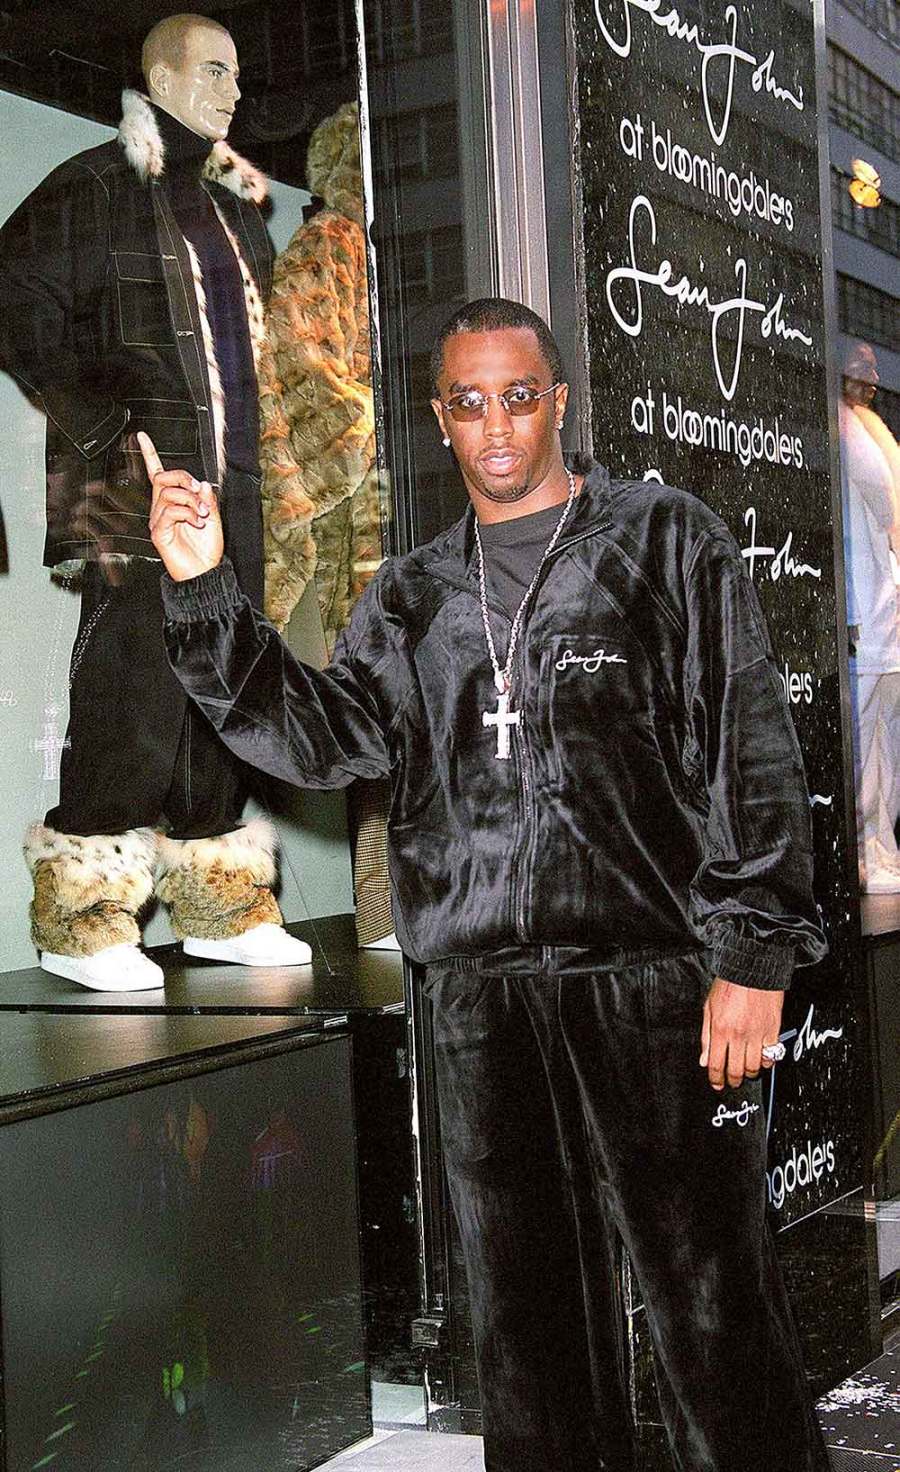 Sean P. Diddy Combs started the Sean John fashion label in the 2000s